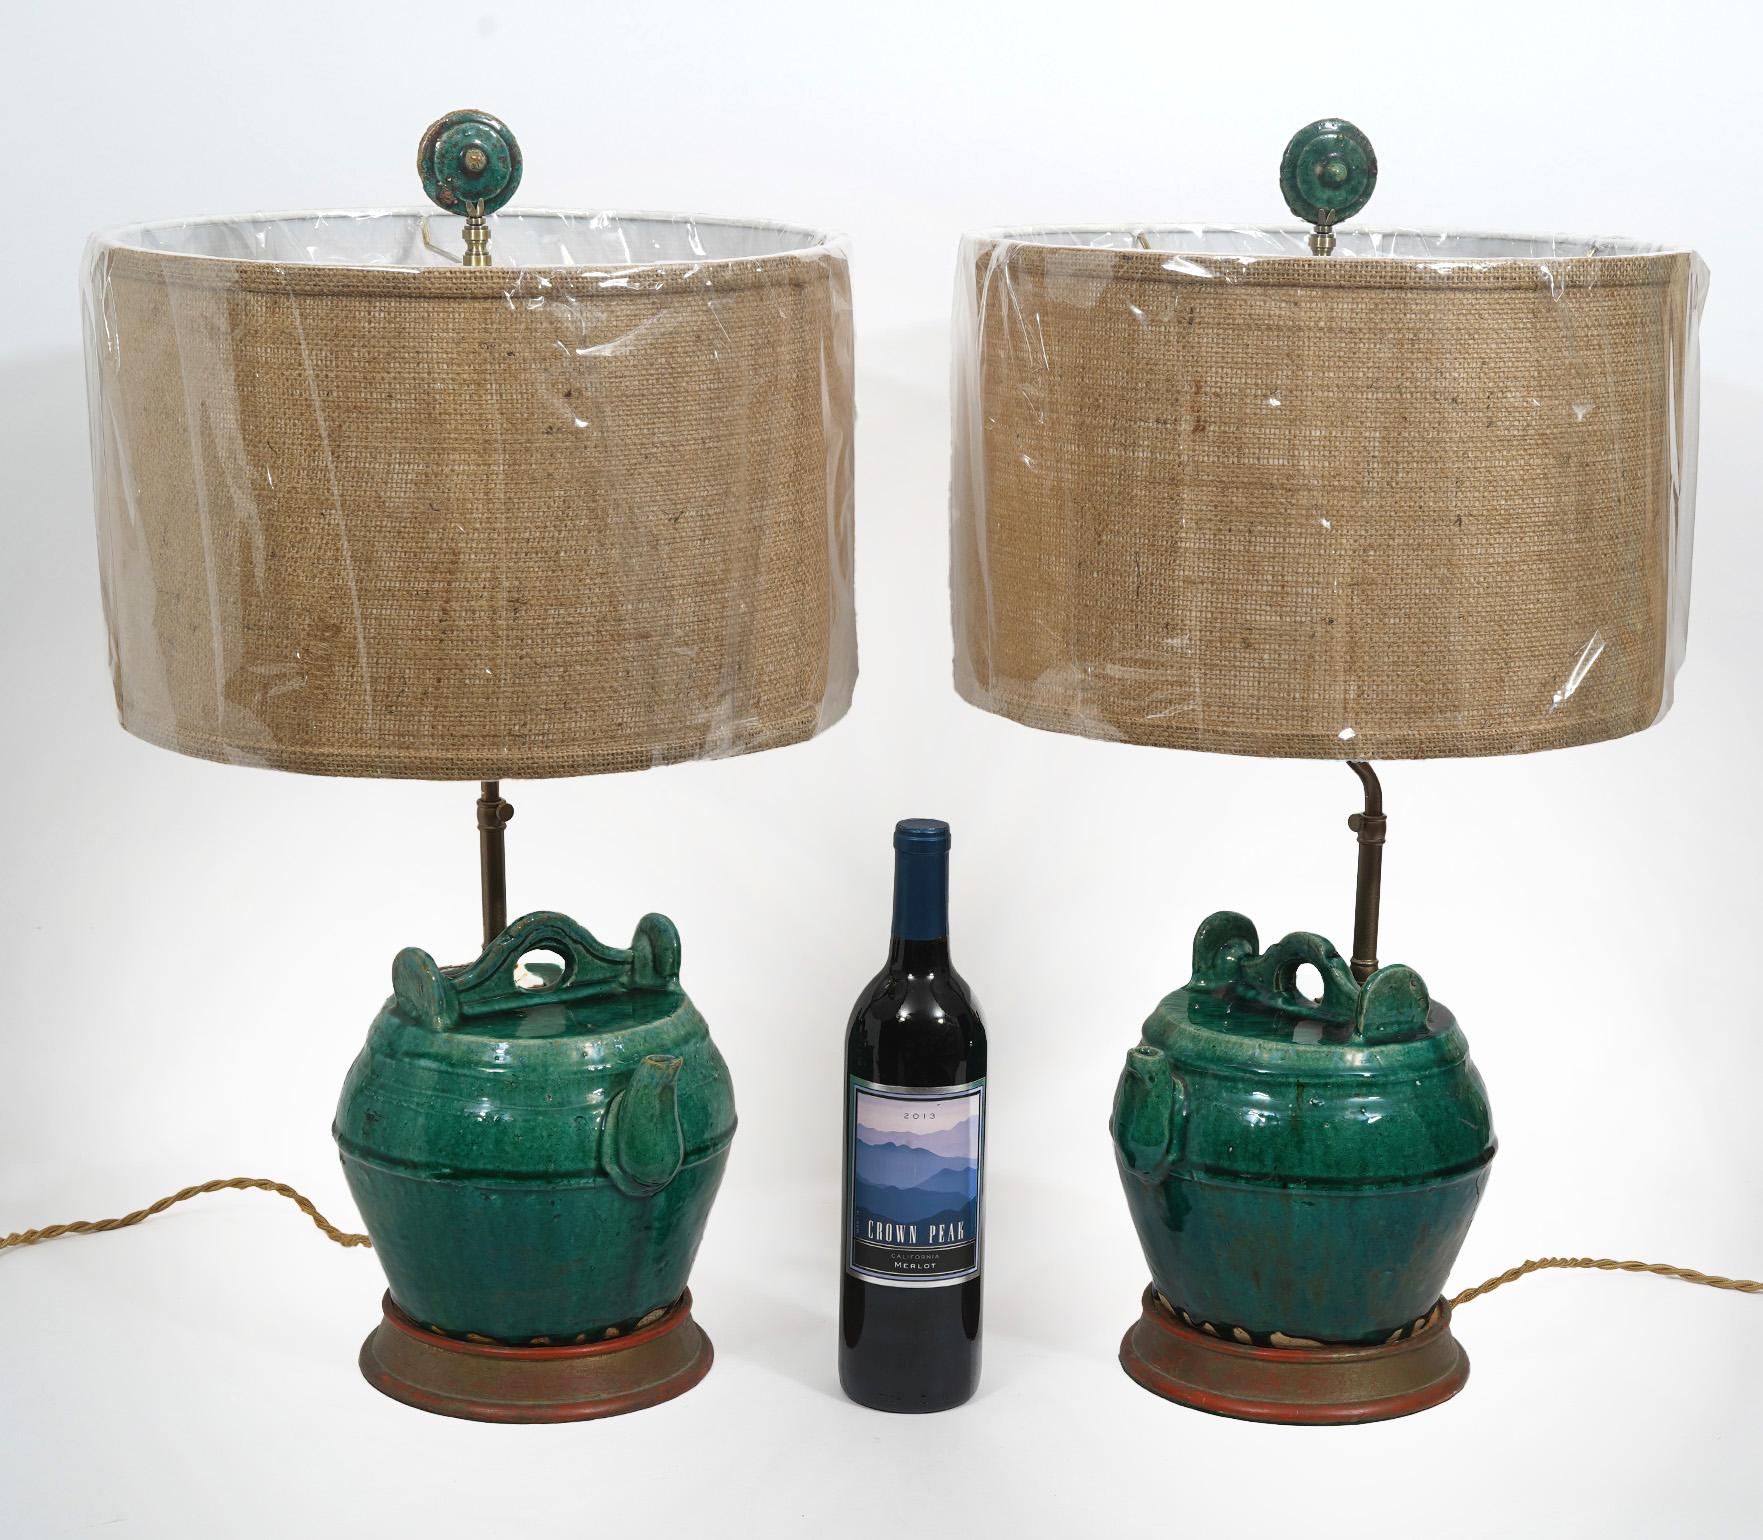 Antique Chinese ceramic jars mounted as table lamps. Recently new hardware and wired. Overall 27